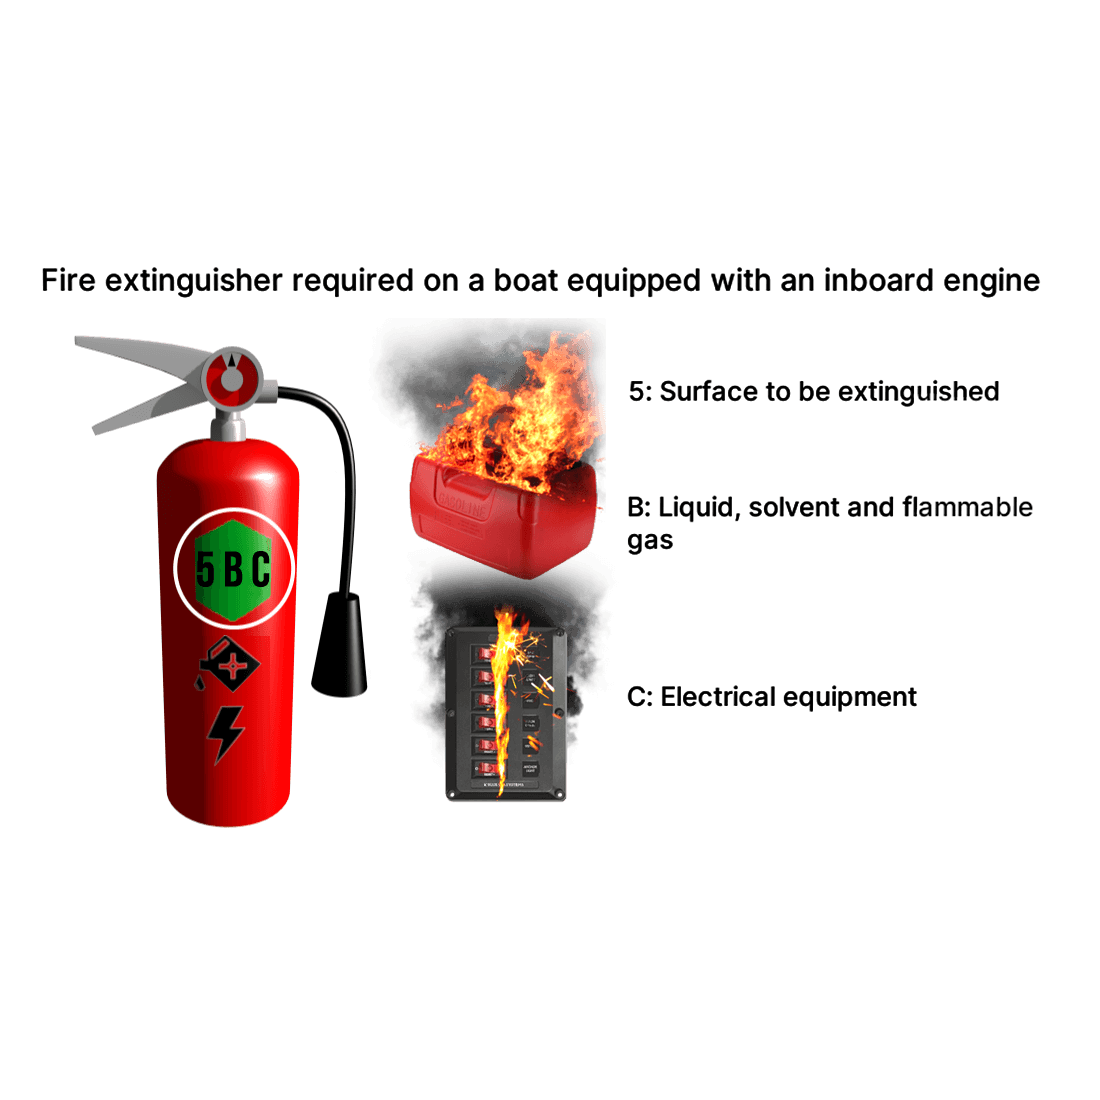 What type of fire extinguisher is required on a motorized pleasure craft?